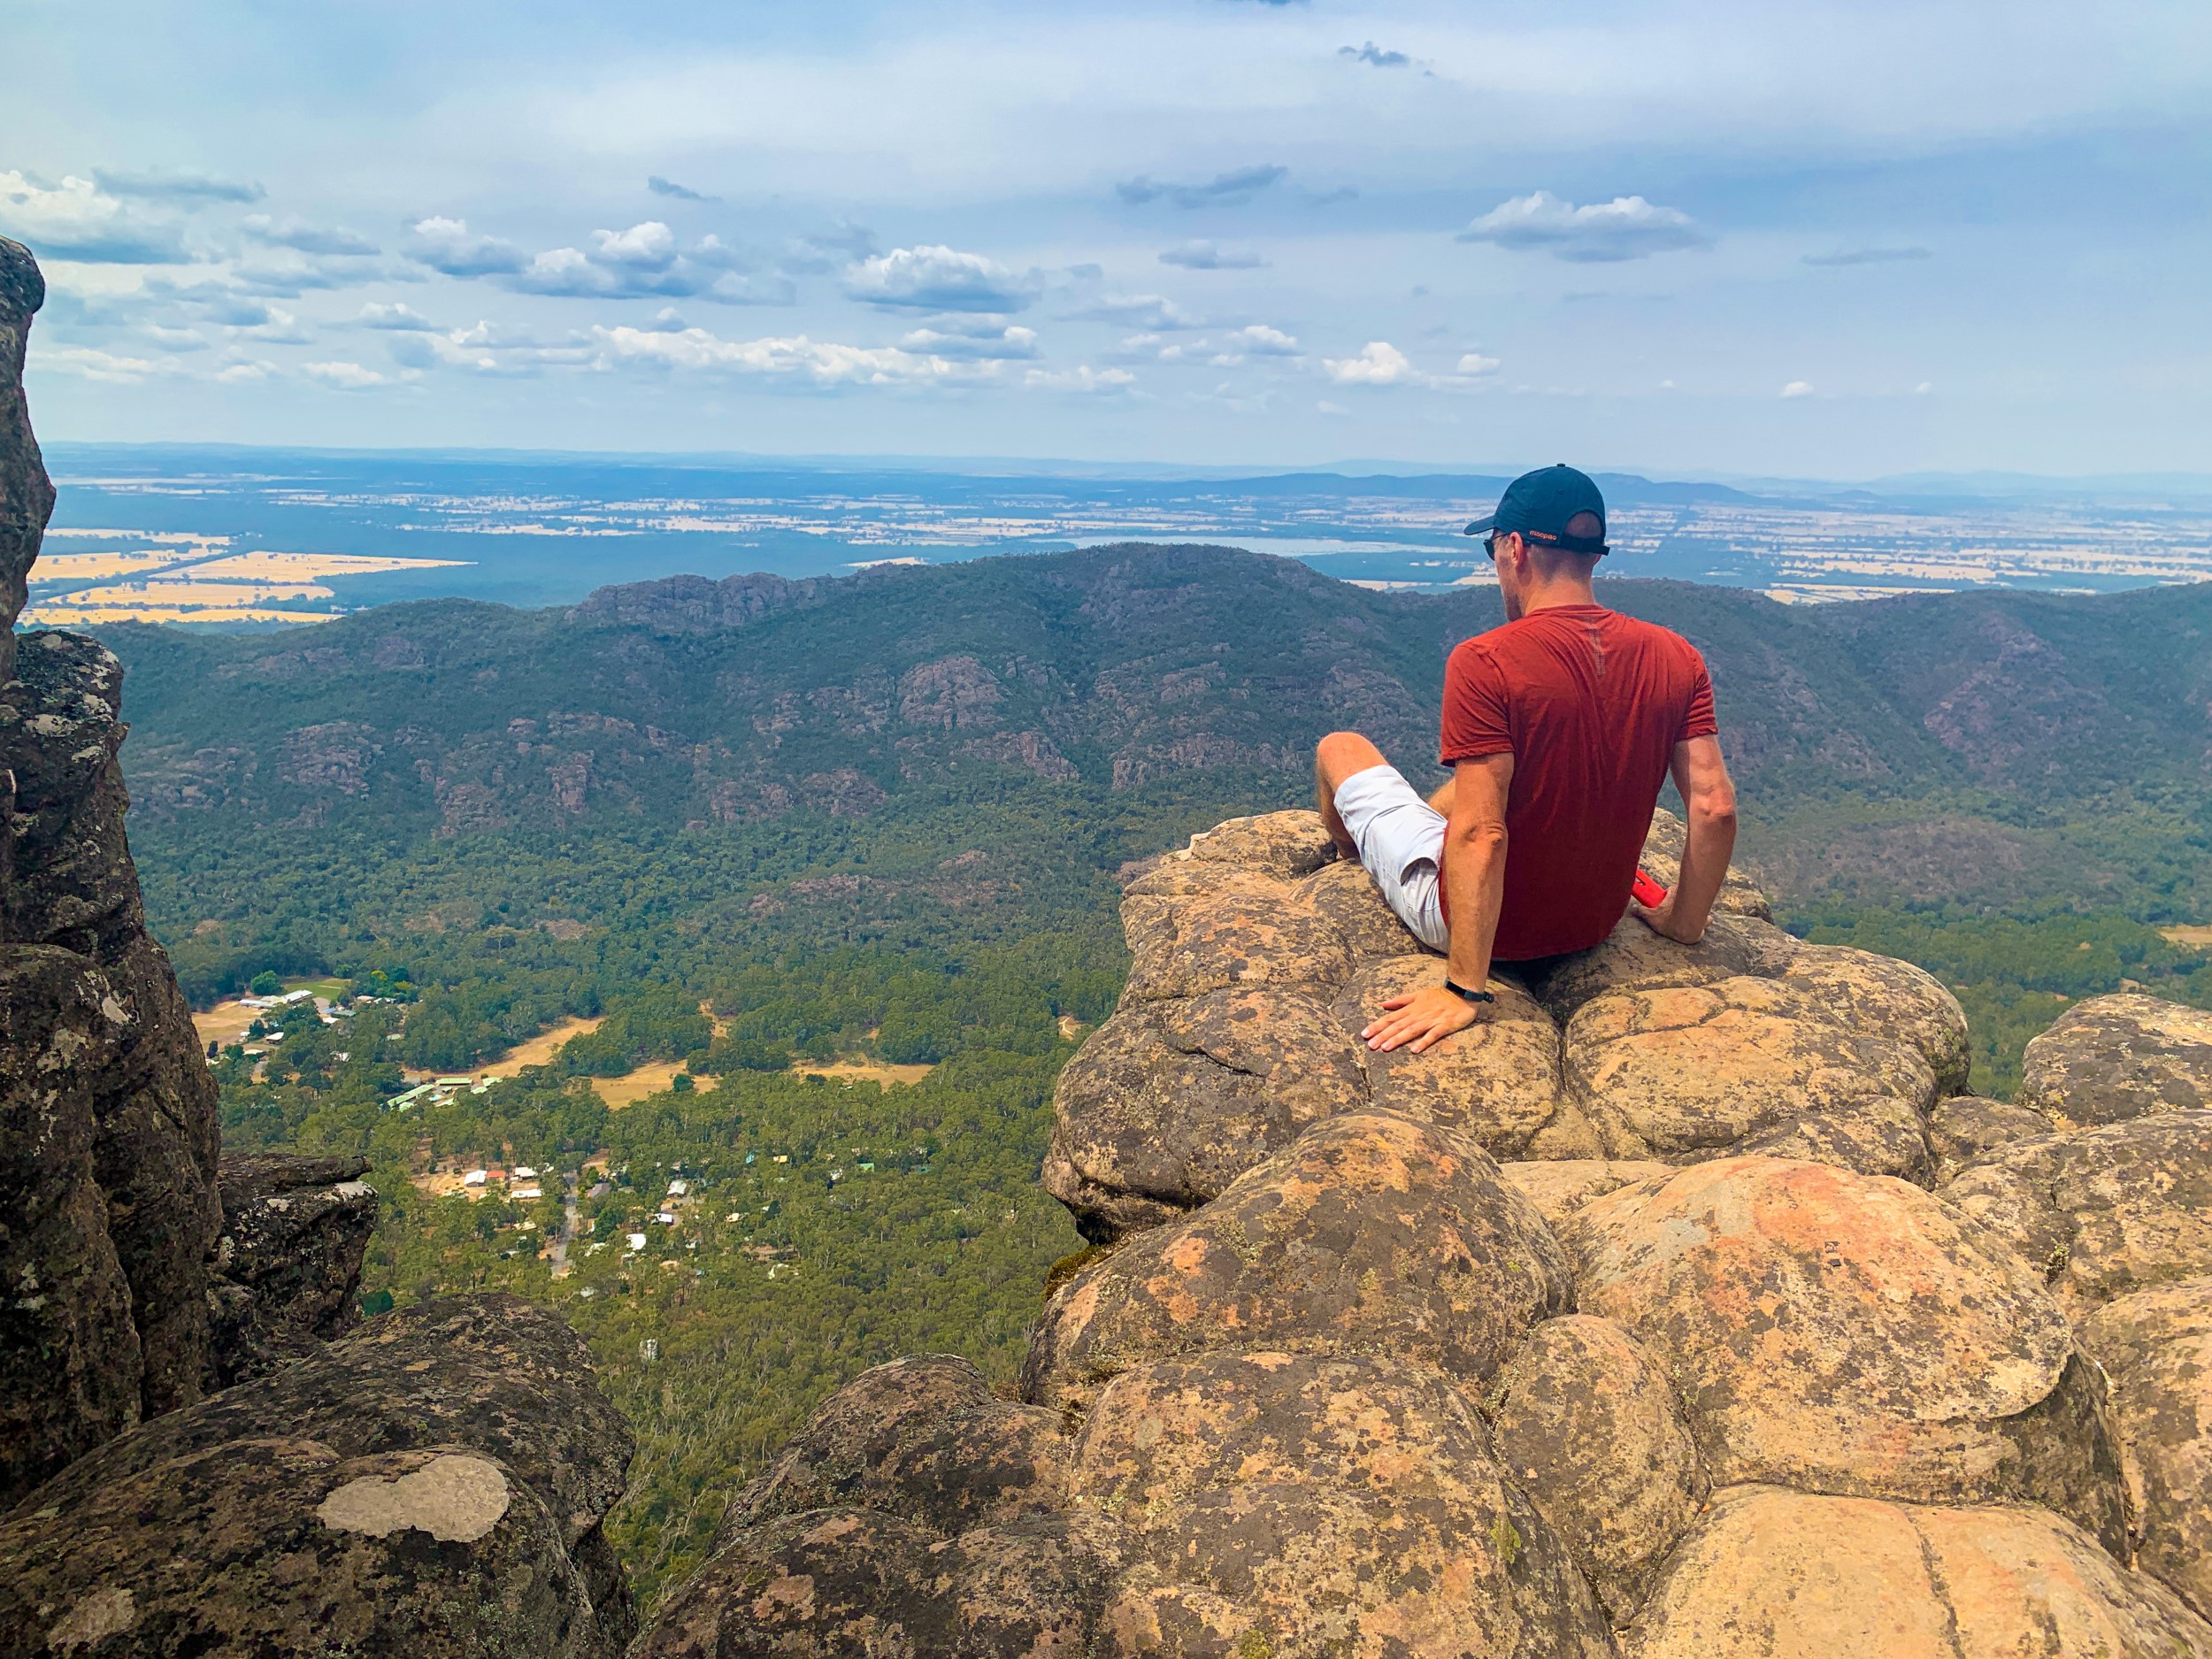 Man sitting on a large rock viewpoint looking over a valley and hills in the distance